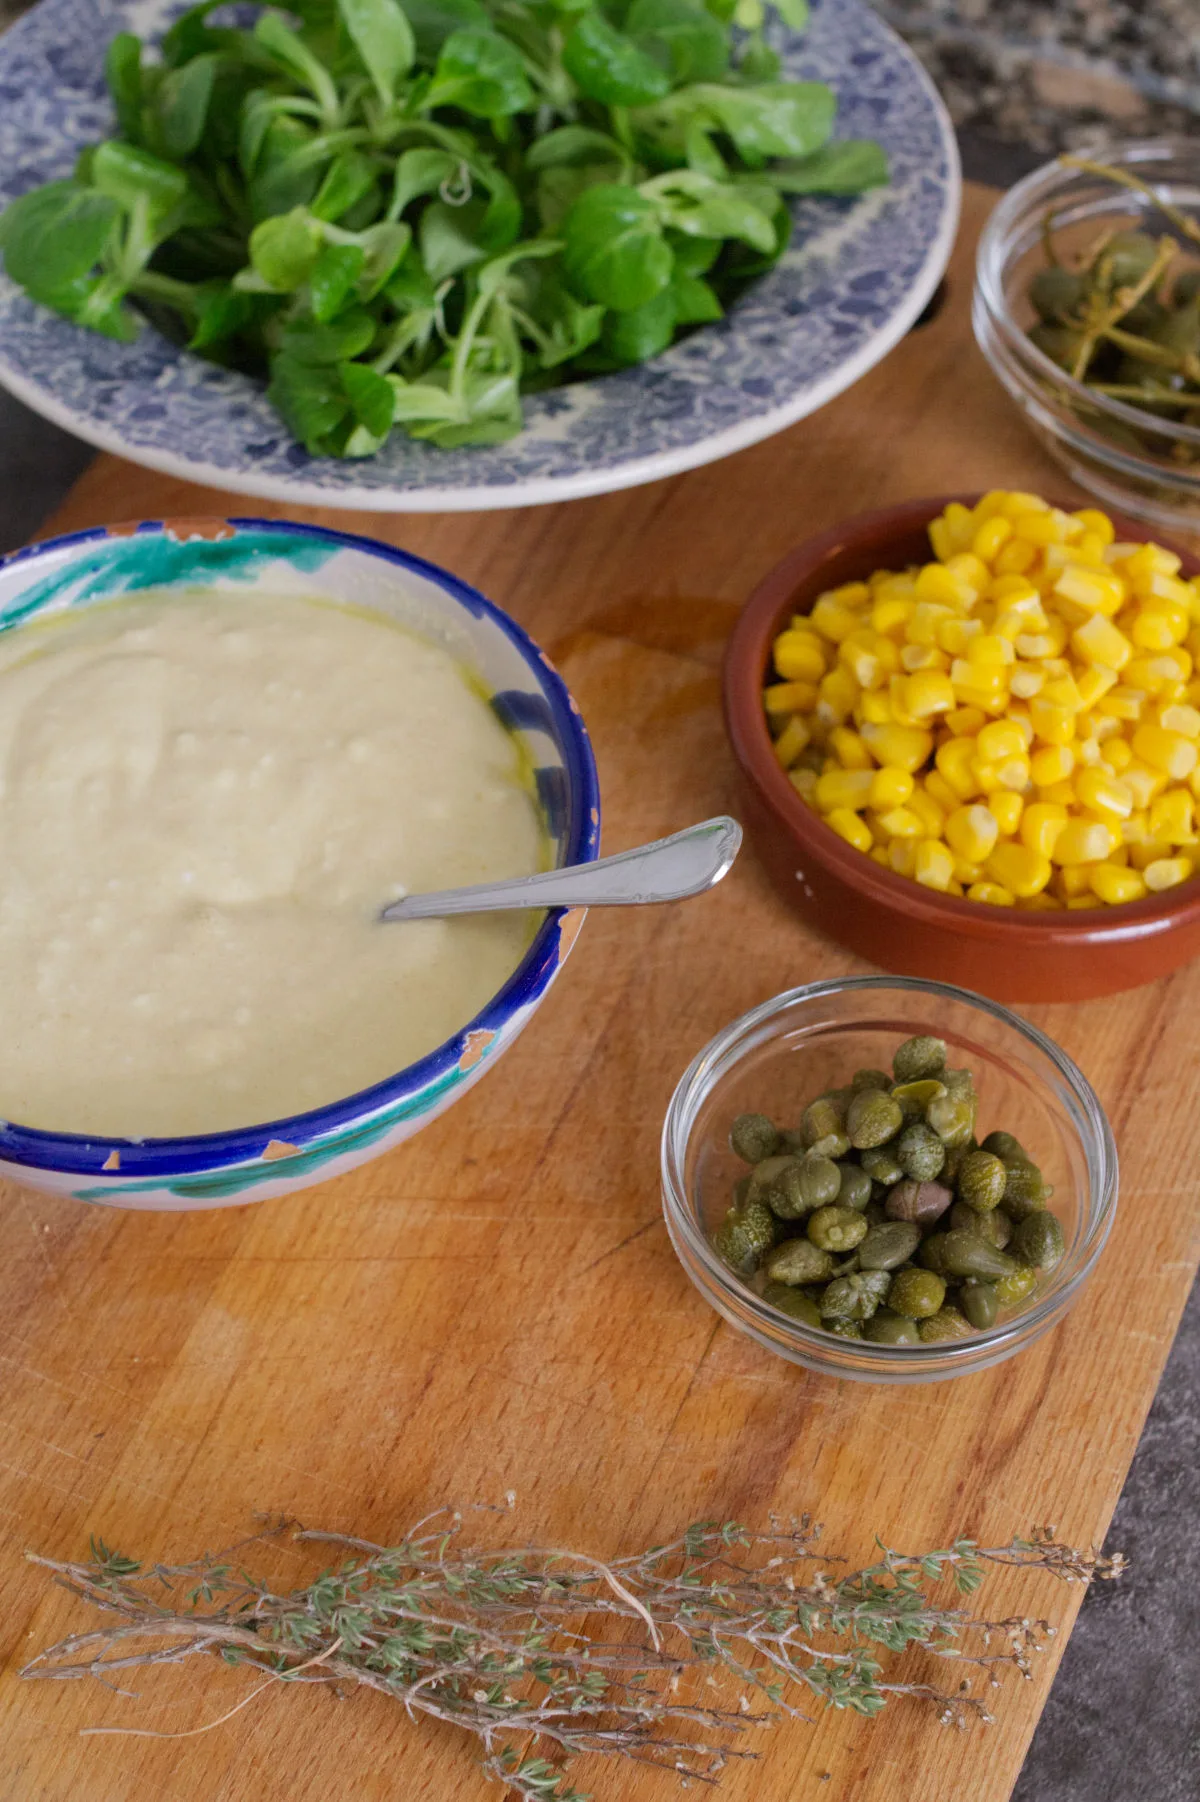 A bowl of yogurt dressing, sweet corn, letuce, and capers.